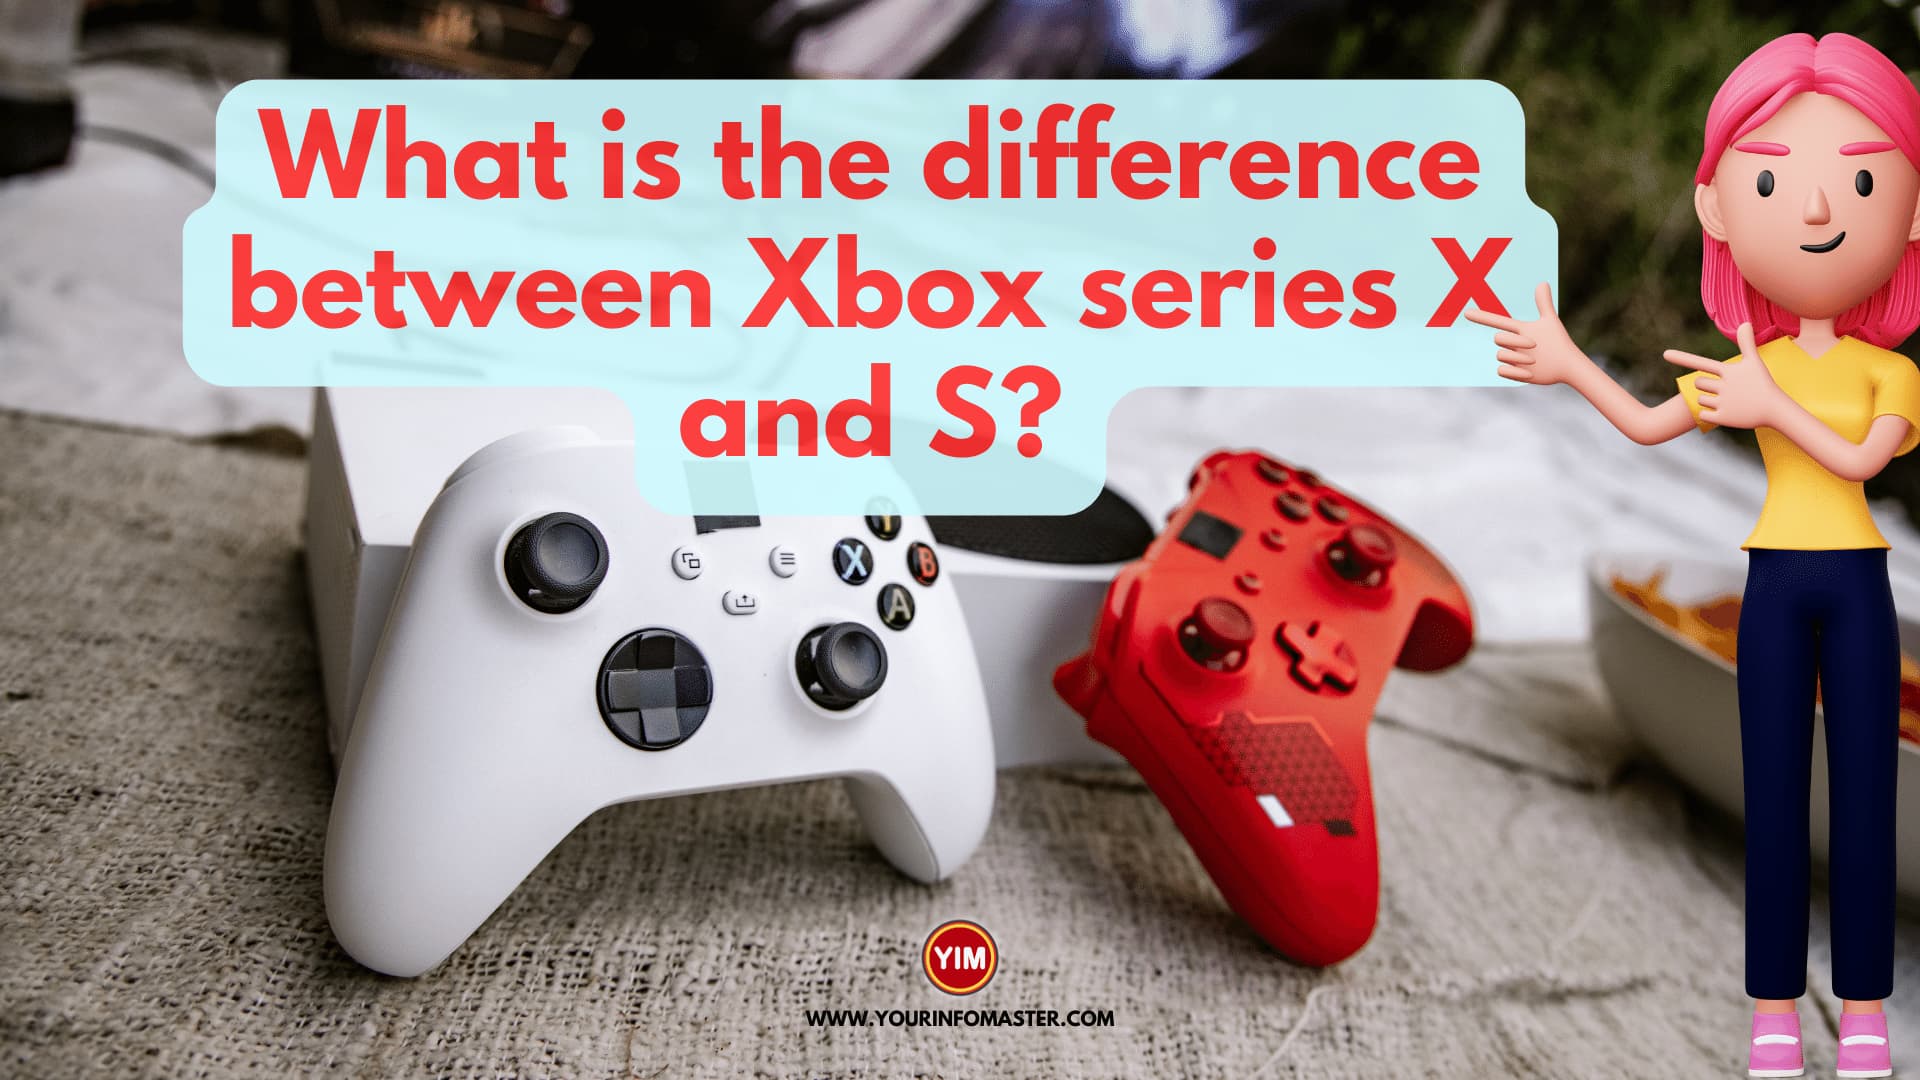 What is the difference between Xbox series X and S